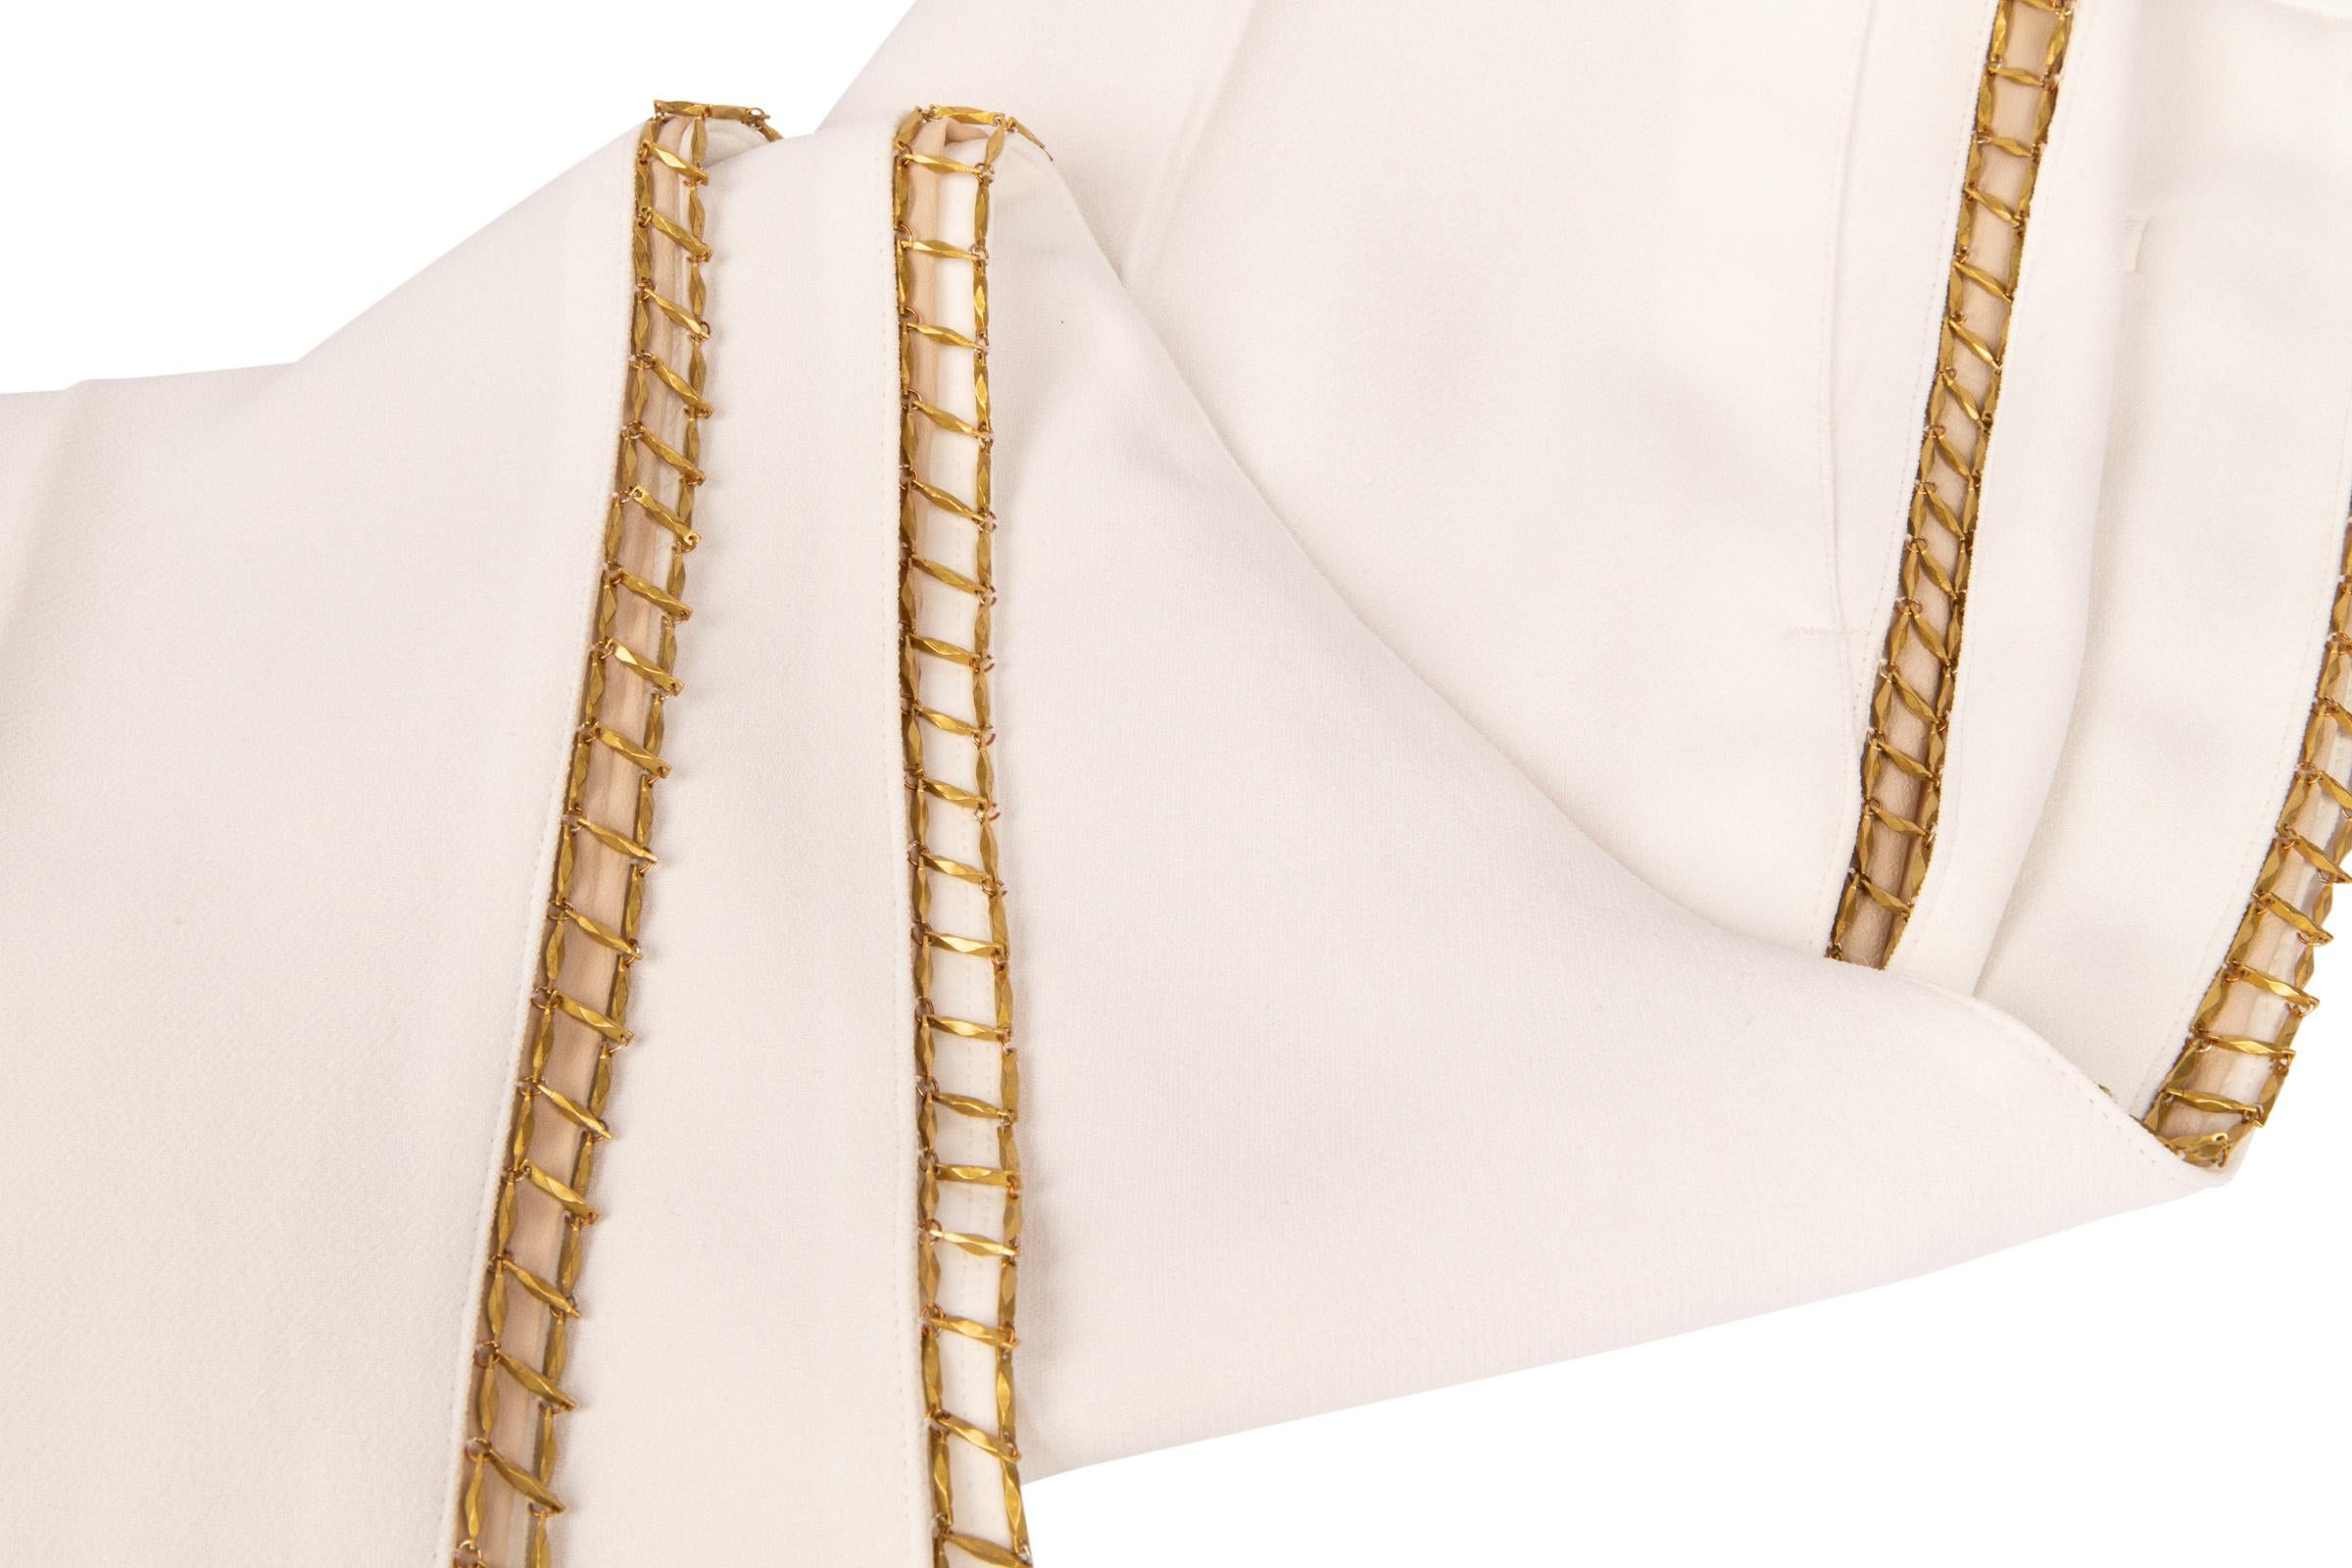 Guaranteed authentic Chloe tapered leg pant in winter white with metal open work in a brushed gold.
Pant has open gold metal work down the side of the leg.
2 rear faux pockets.
Small snag close to waist.
Simply gorgeous.
See matching white blouse